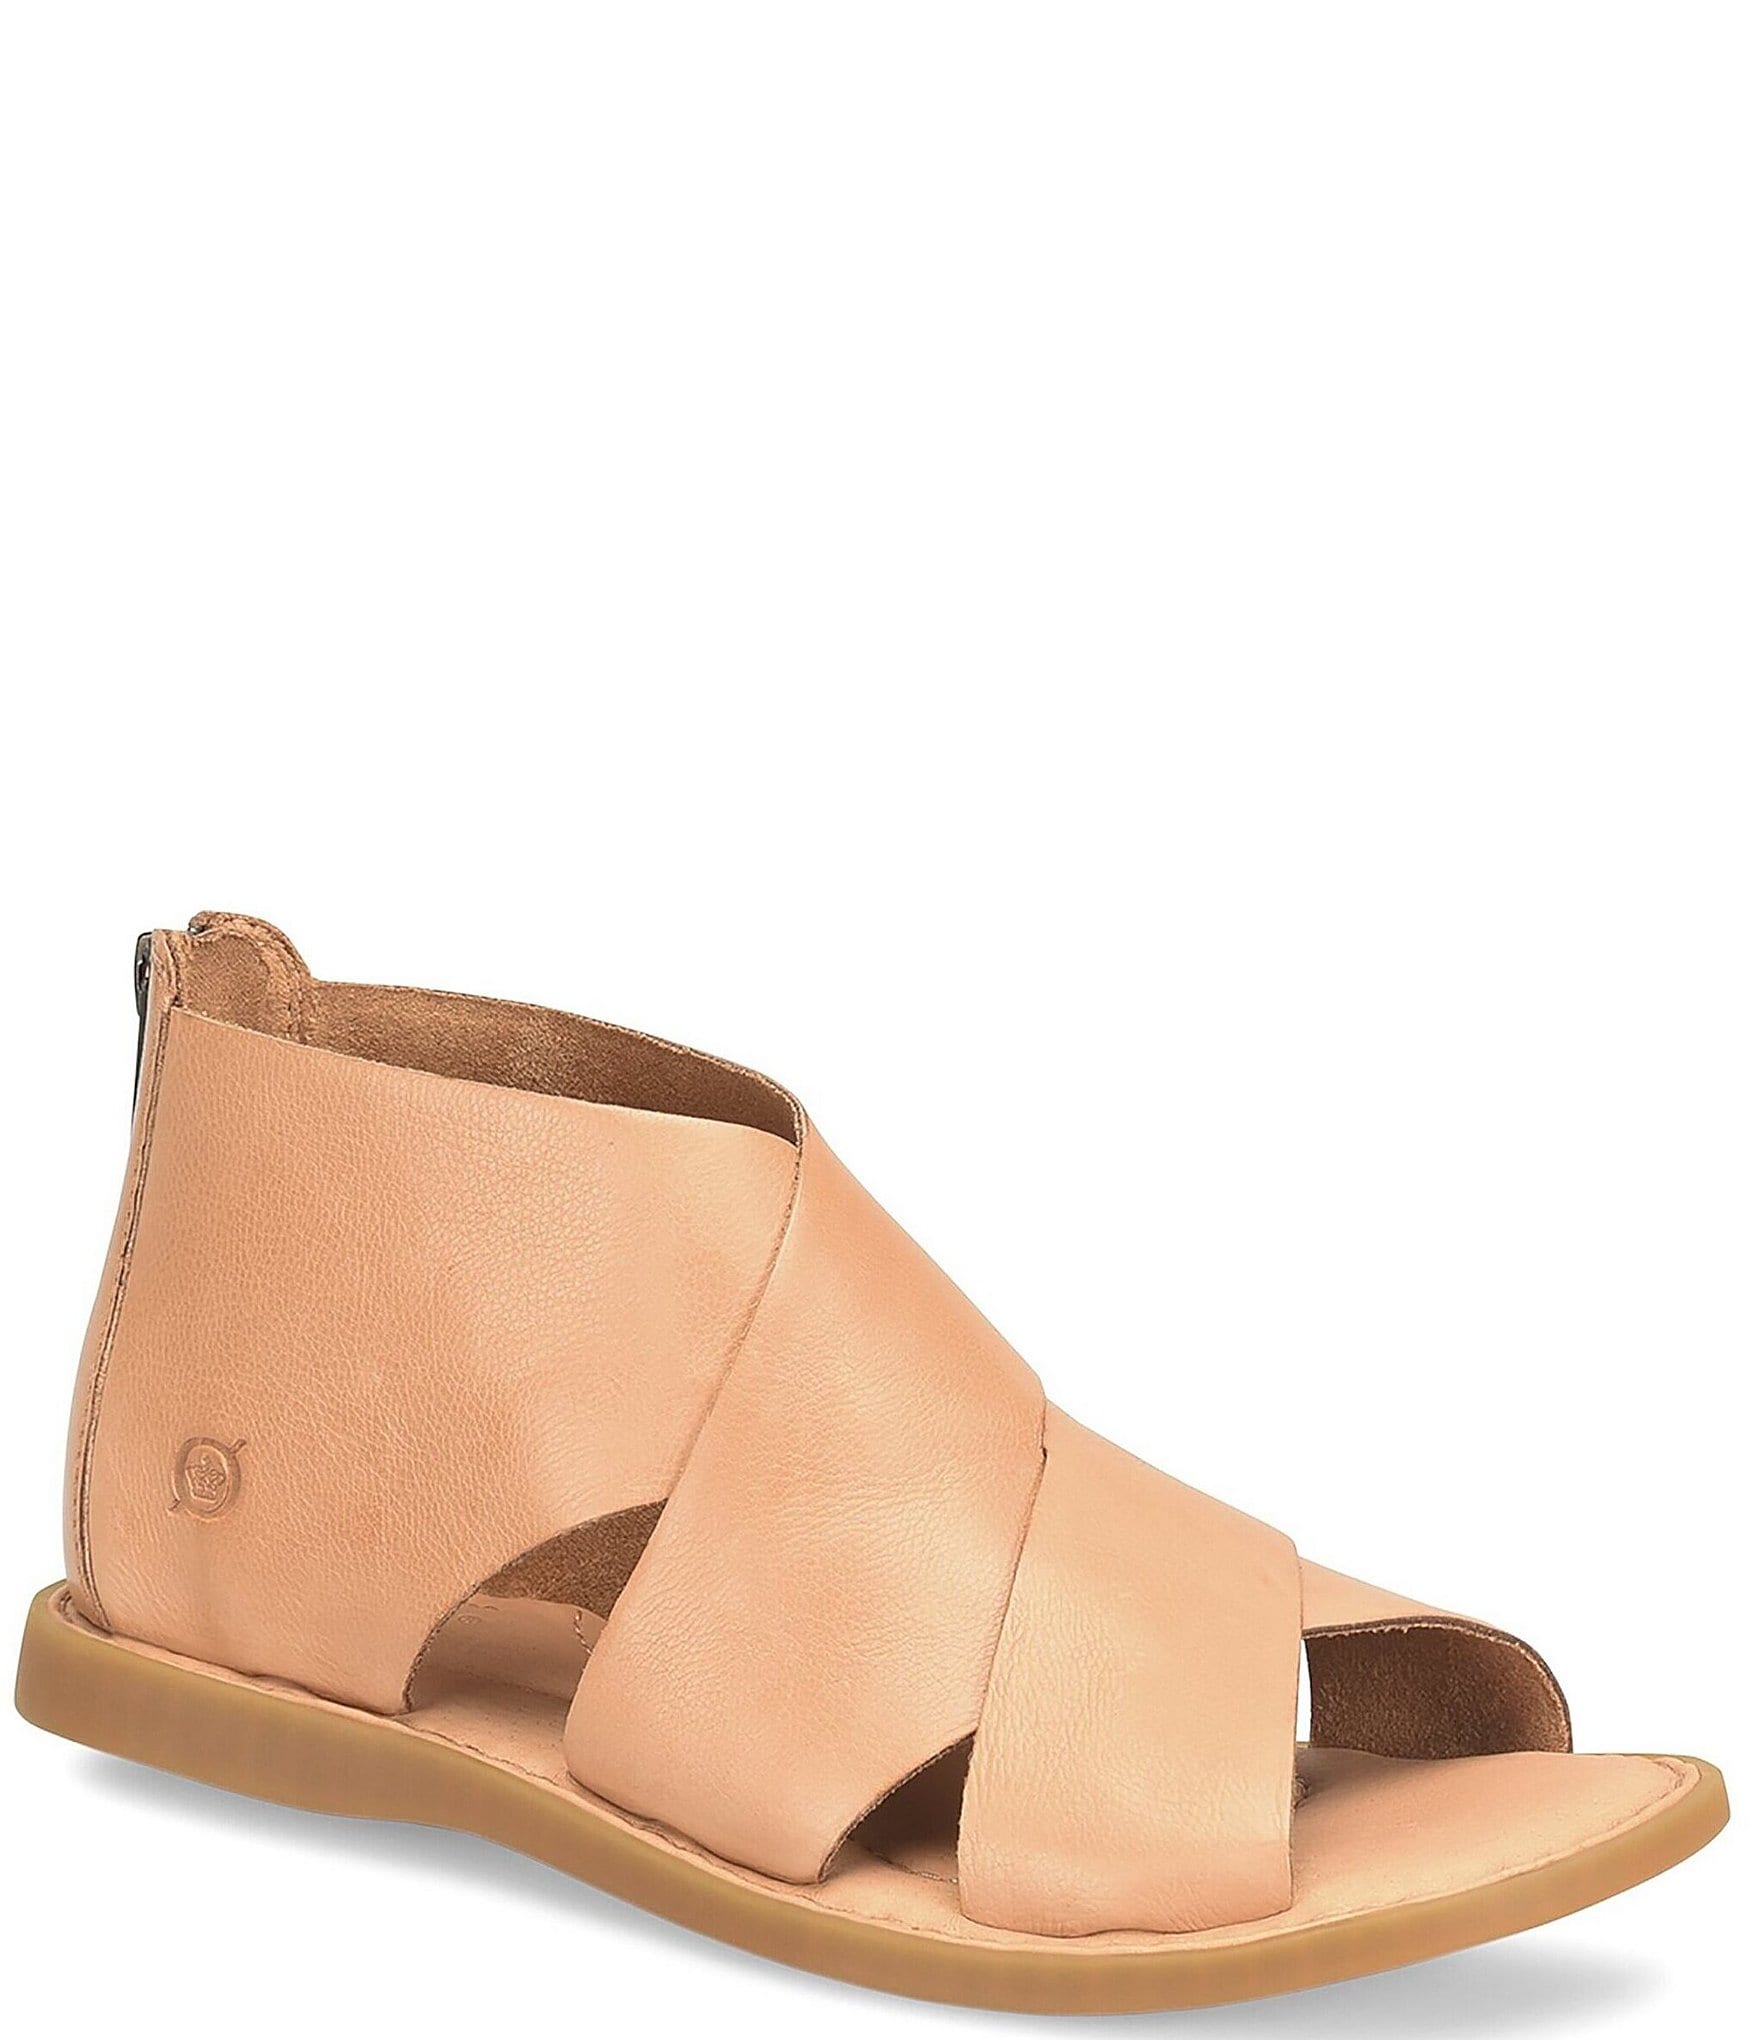 Women's Born Sandals + FREE SHIPPING | Shoes | Zappos.com